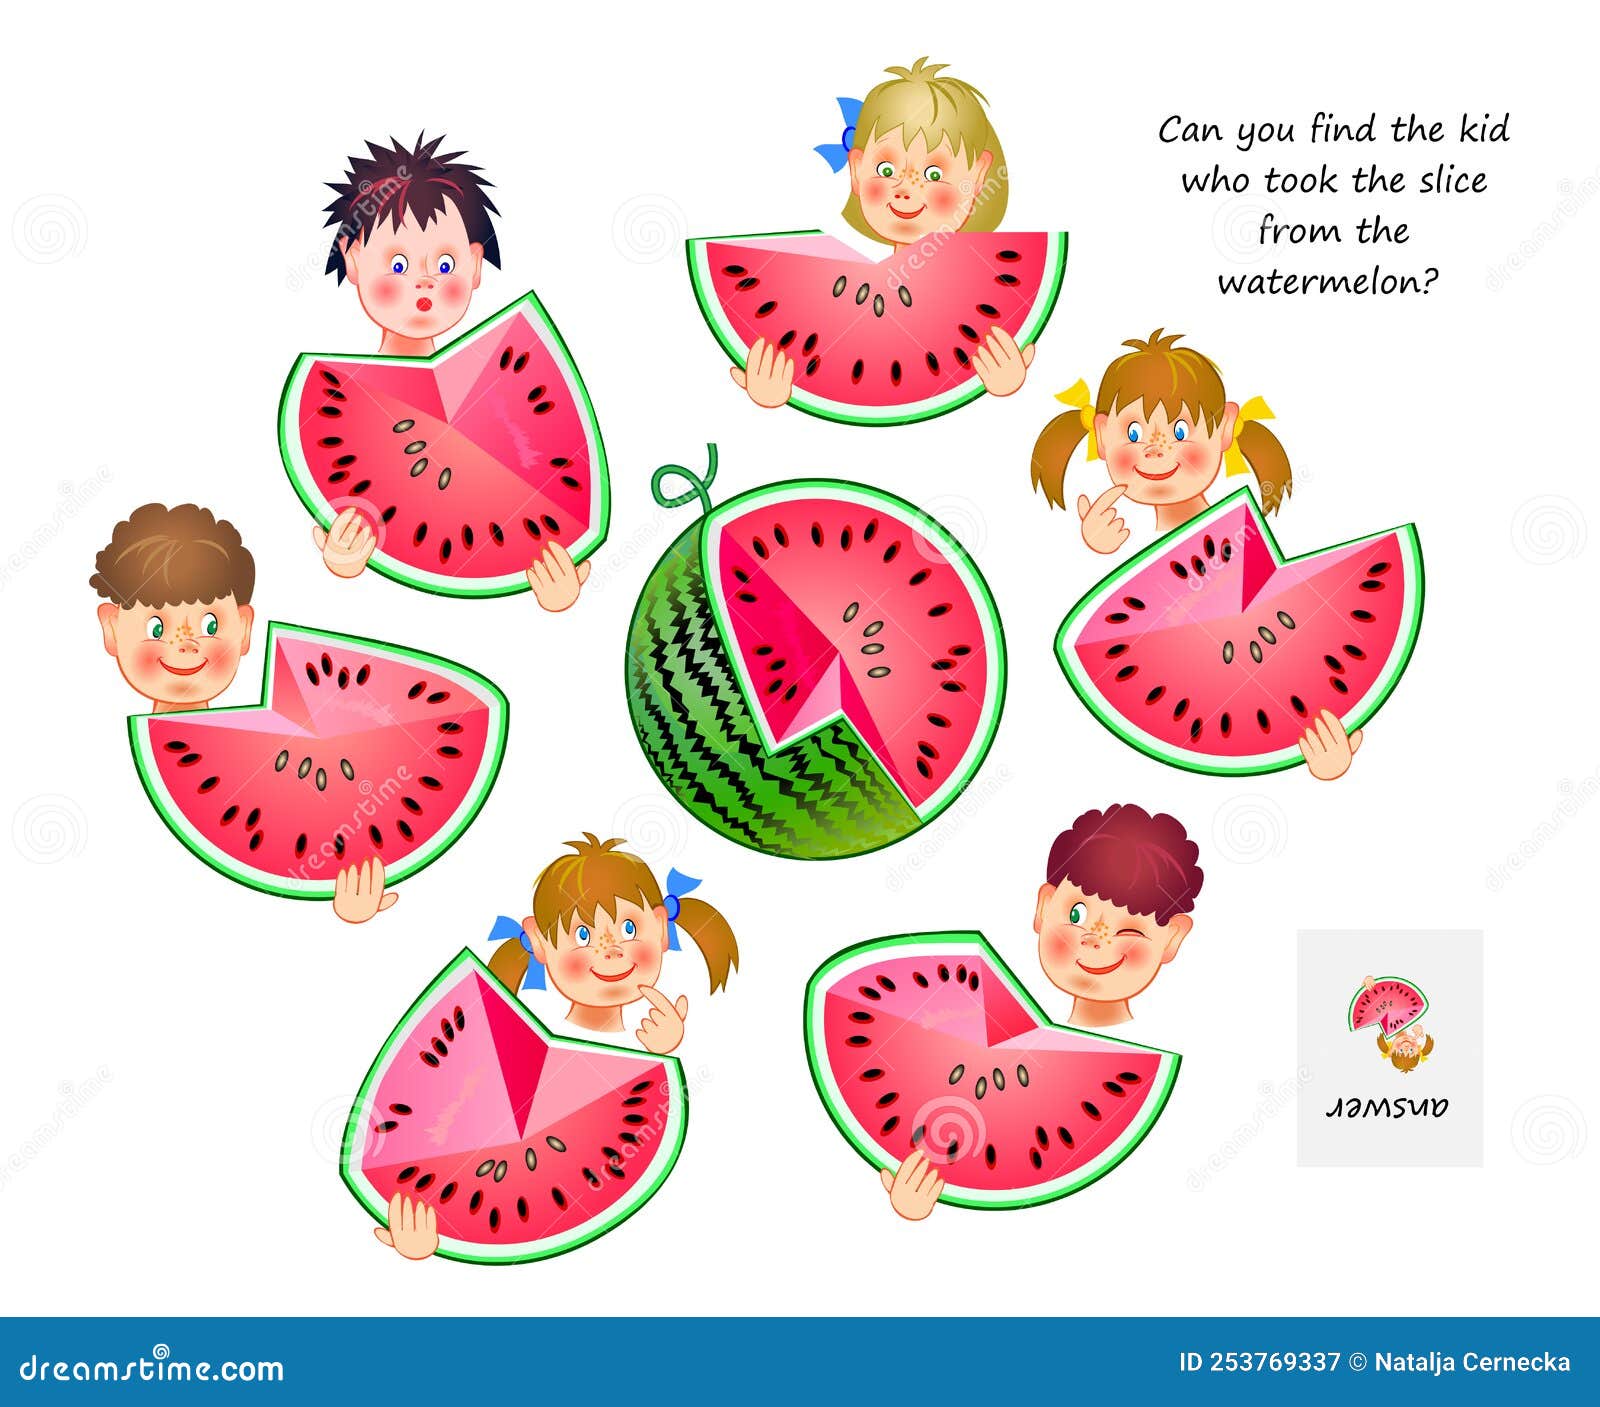 logic game for smartest. 3d puzzle. can you find the kid who took the slice from the watermelon? play online. developing spatial